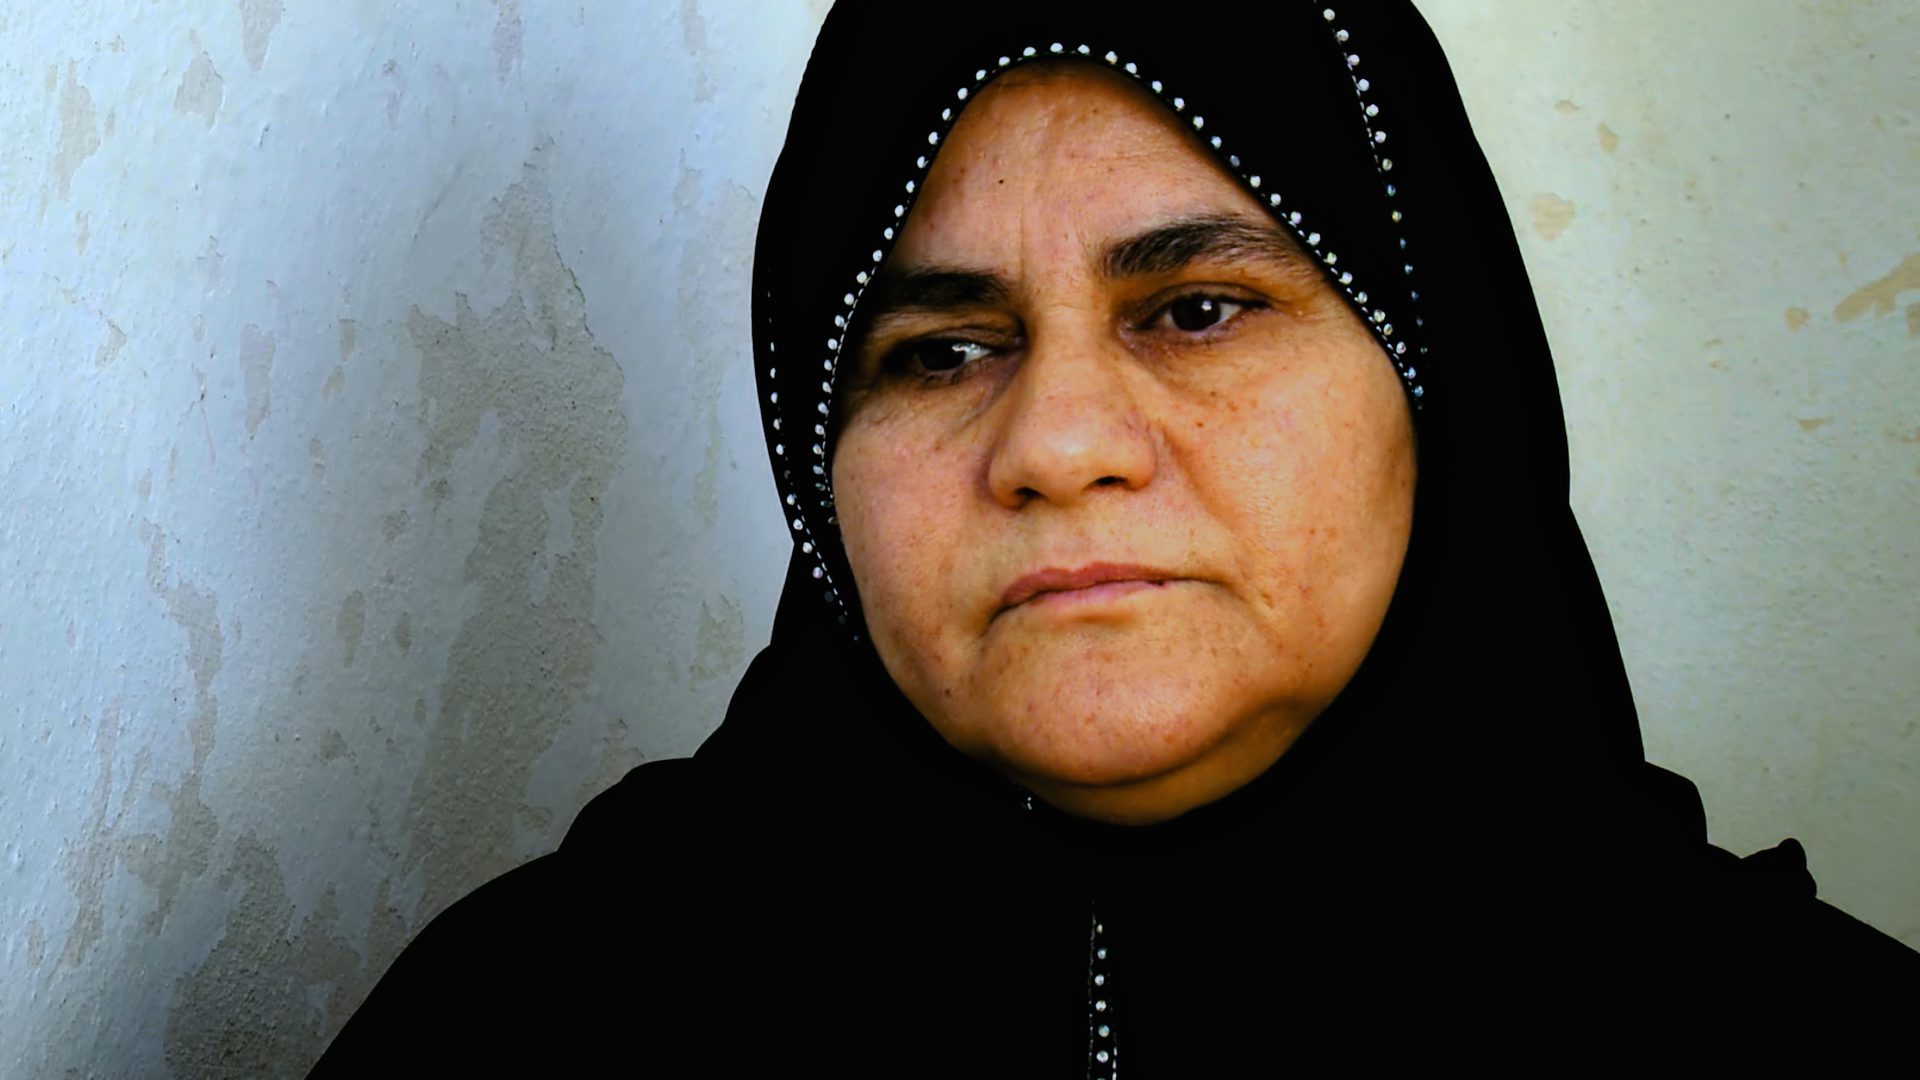 More than 50 villagers from Kureme died during Anfal. FAIROOZ TAHA SAADI waited three years for her husband to return, but in 1992 American forensic specialists uncovered mass graves in Kureme. They discovered the pyjamas her husband was wearing when captured. This established beyond doubt that he had been executed by the Iraqis.